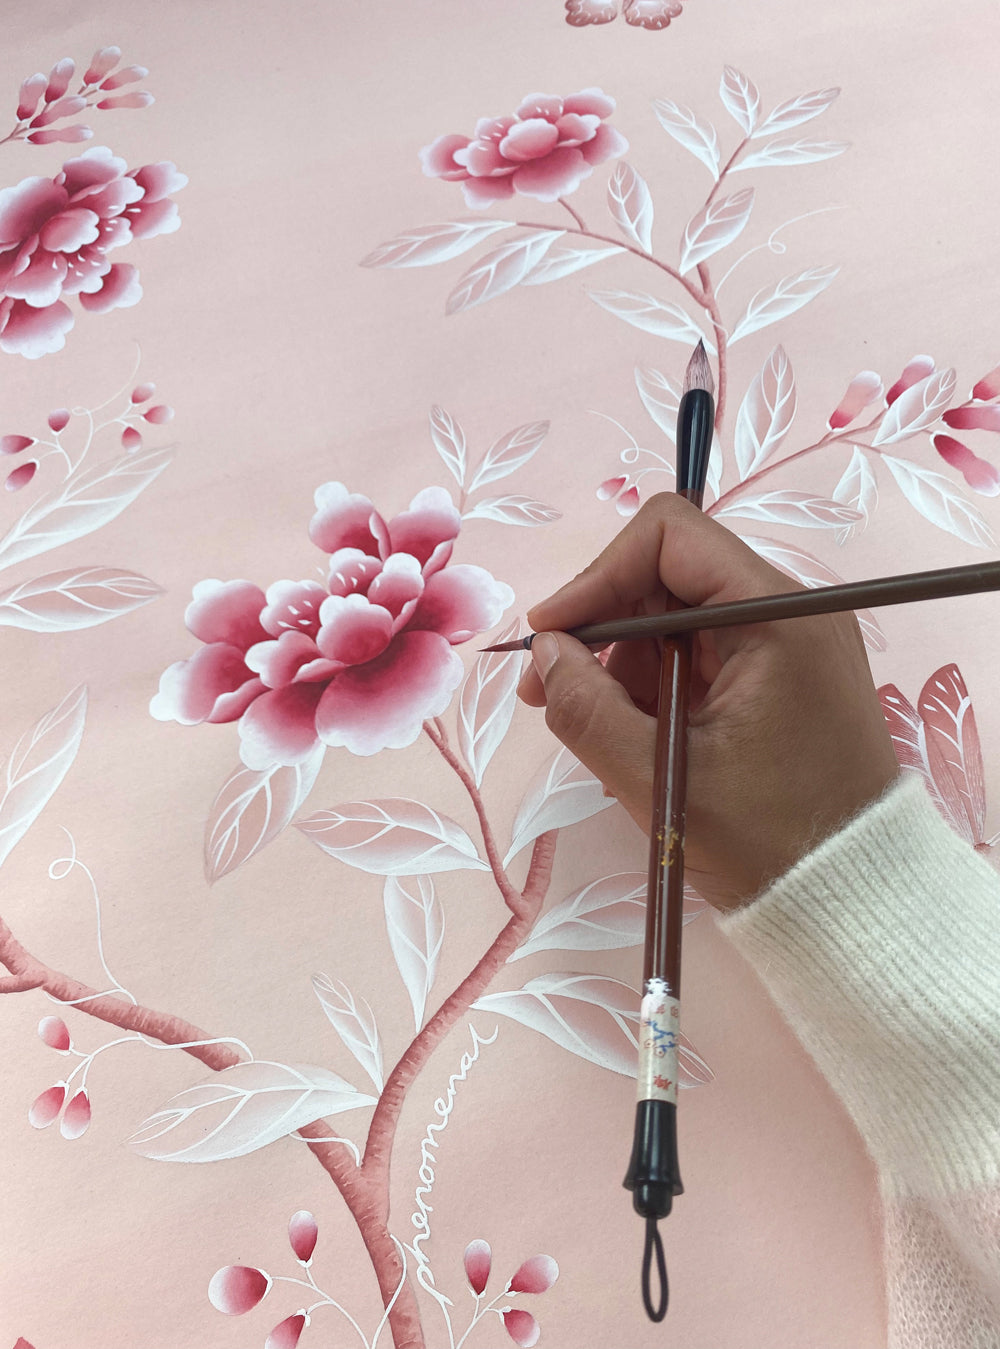 Diane Hill hand painting the design for the nap dress created by Hill House Home in collaboration with Phenomenal and Netflix, featuring her bespoke pink chinoiserie design